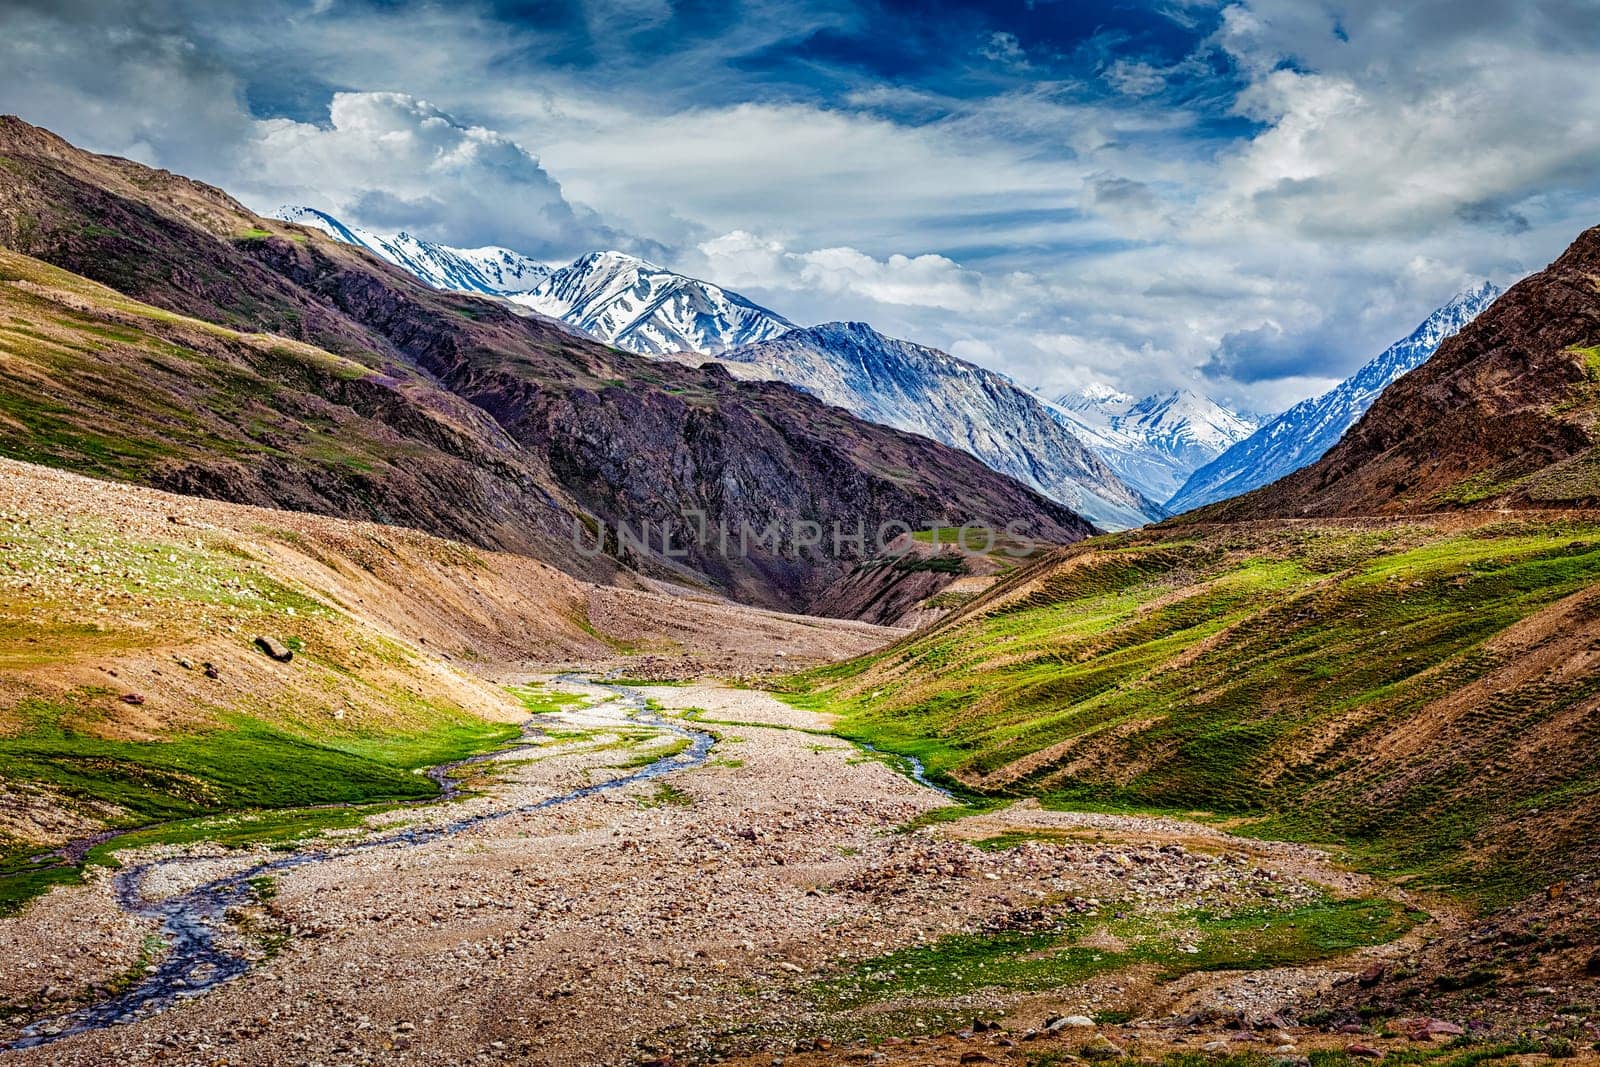 Himalayan landscape in Himalayas by dimol